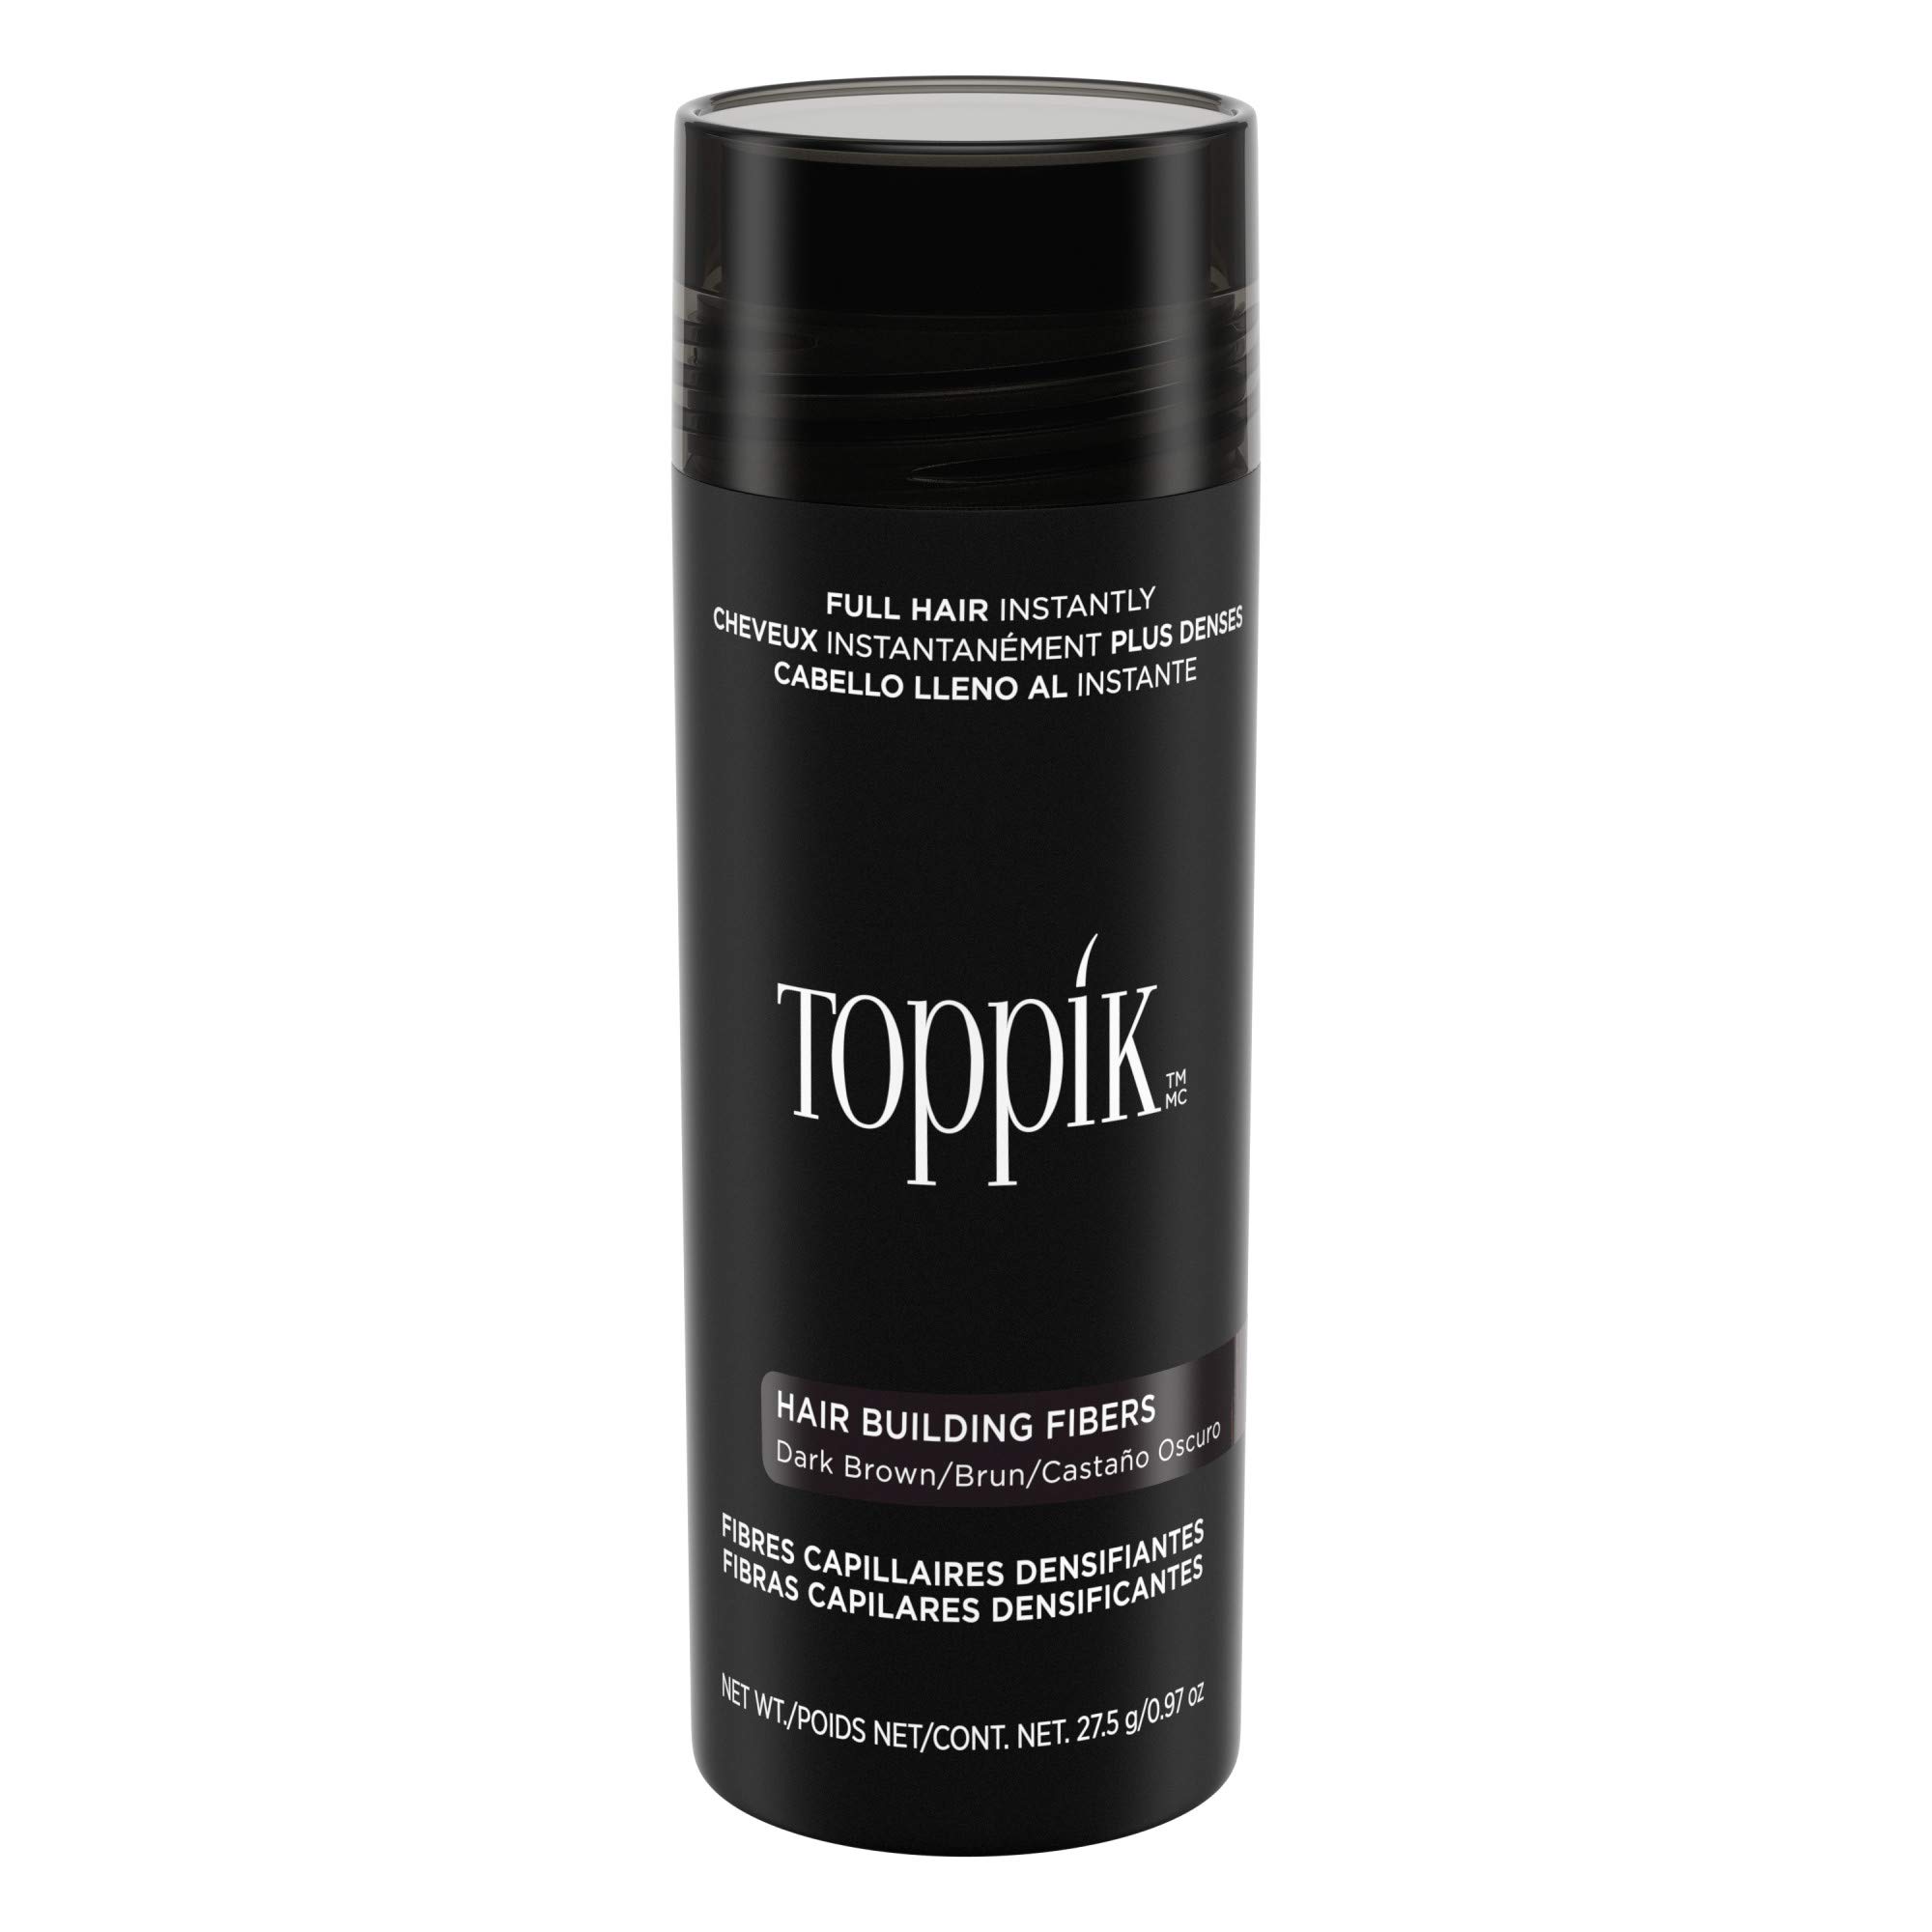 Toppik Hair Building Fibers, Dark Brown, 27.5g, Fill In Fine or Thinning Hair, Instantly Thicker, Fuller Looking Hair, 9 Shades for Men and Women , 0.97 Oz (Pack of 1)